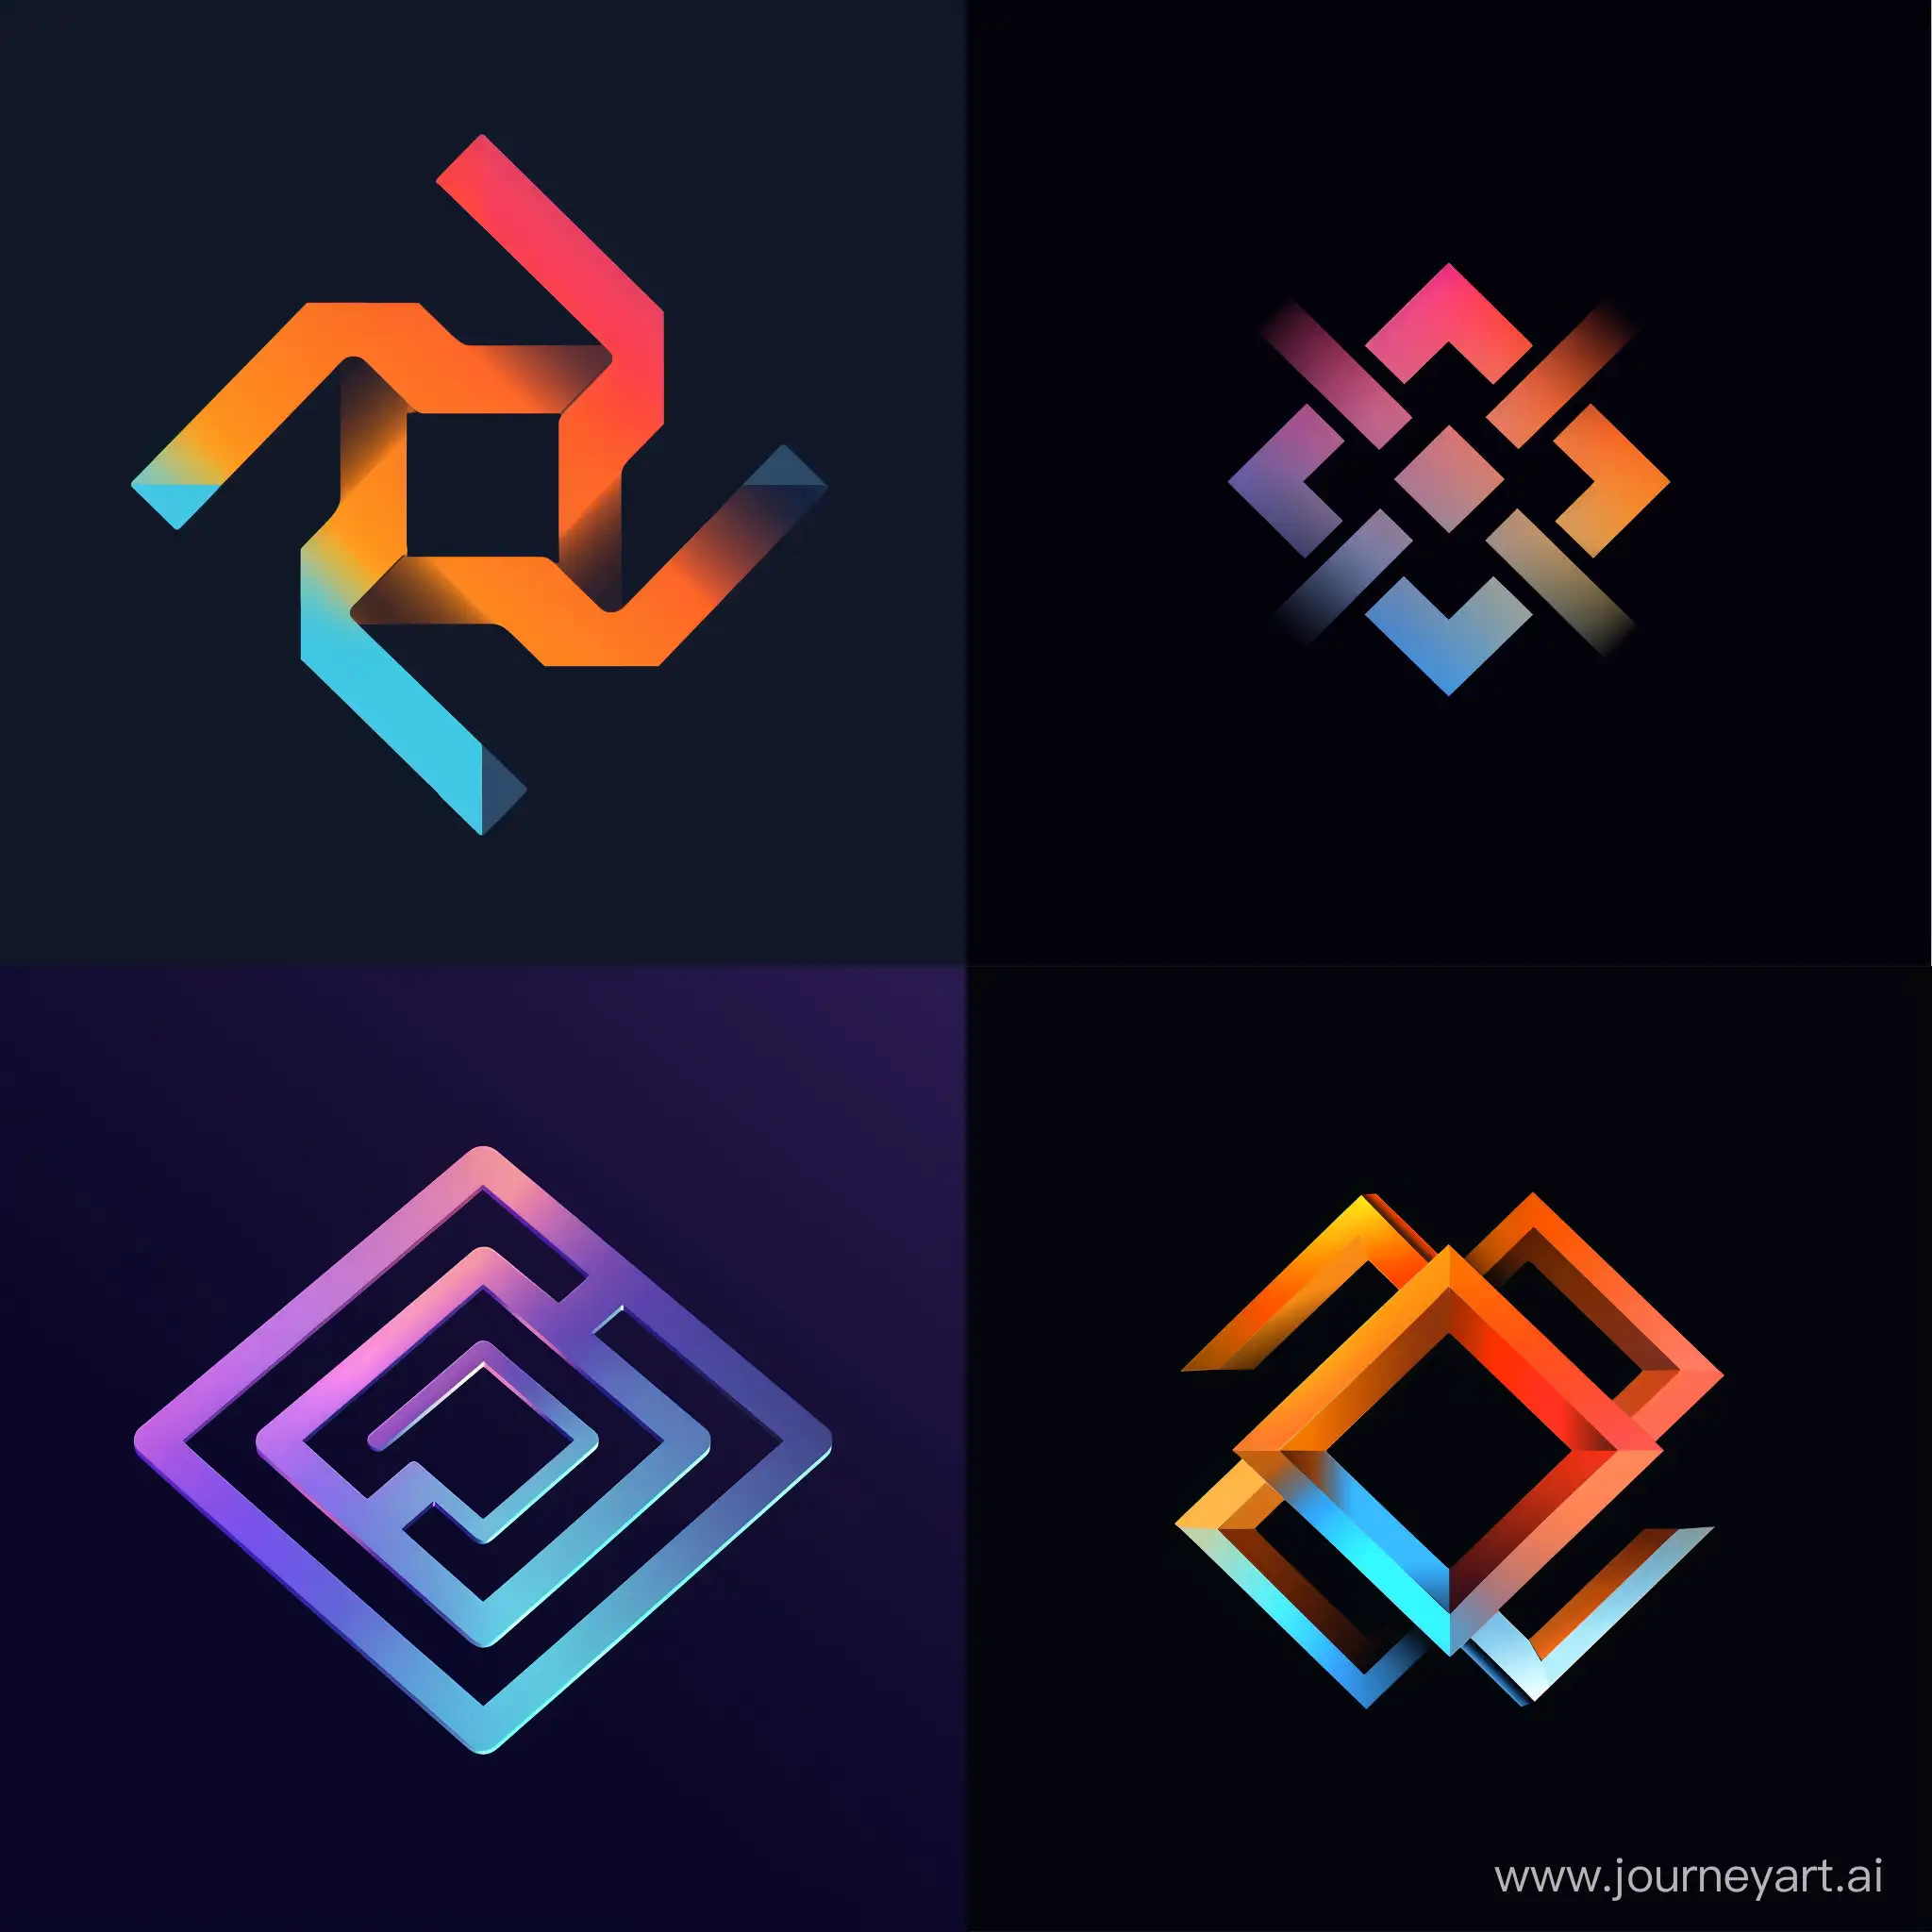 A logo for a tech startup named square lab